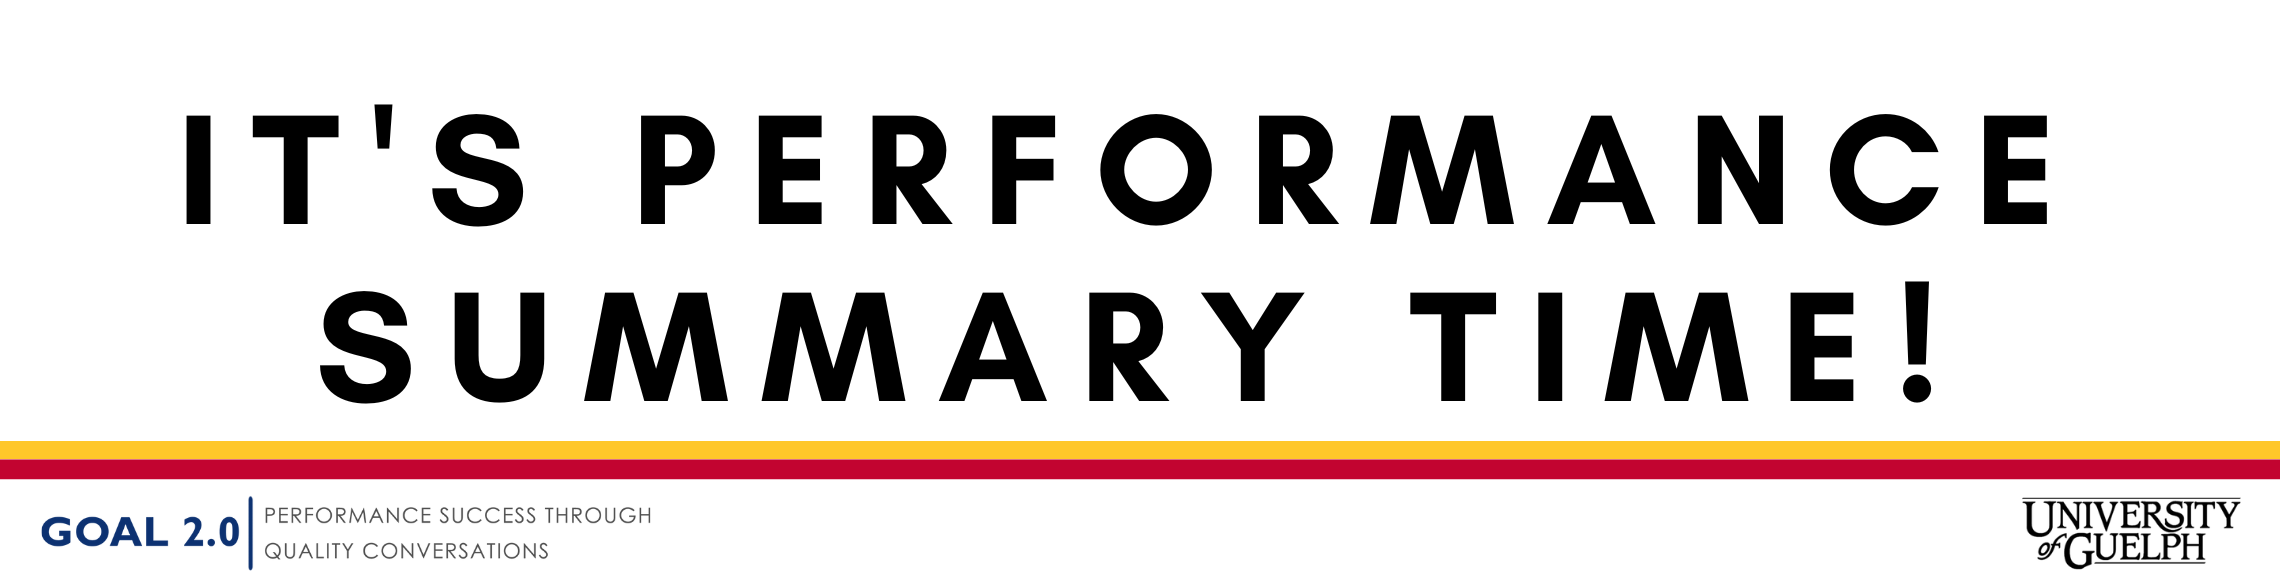 Banner reads, "It's Performance Summary Time!" and includes "GOAL 2.0 Performance success through quality conversations logo and University of Guelph logo.